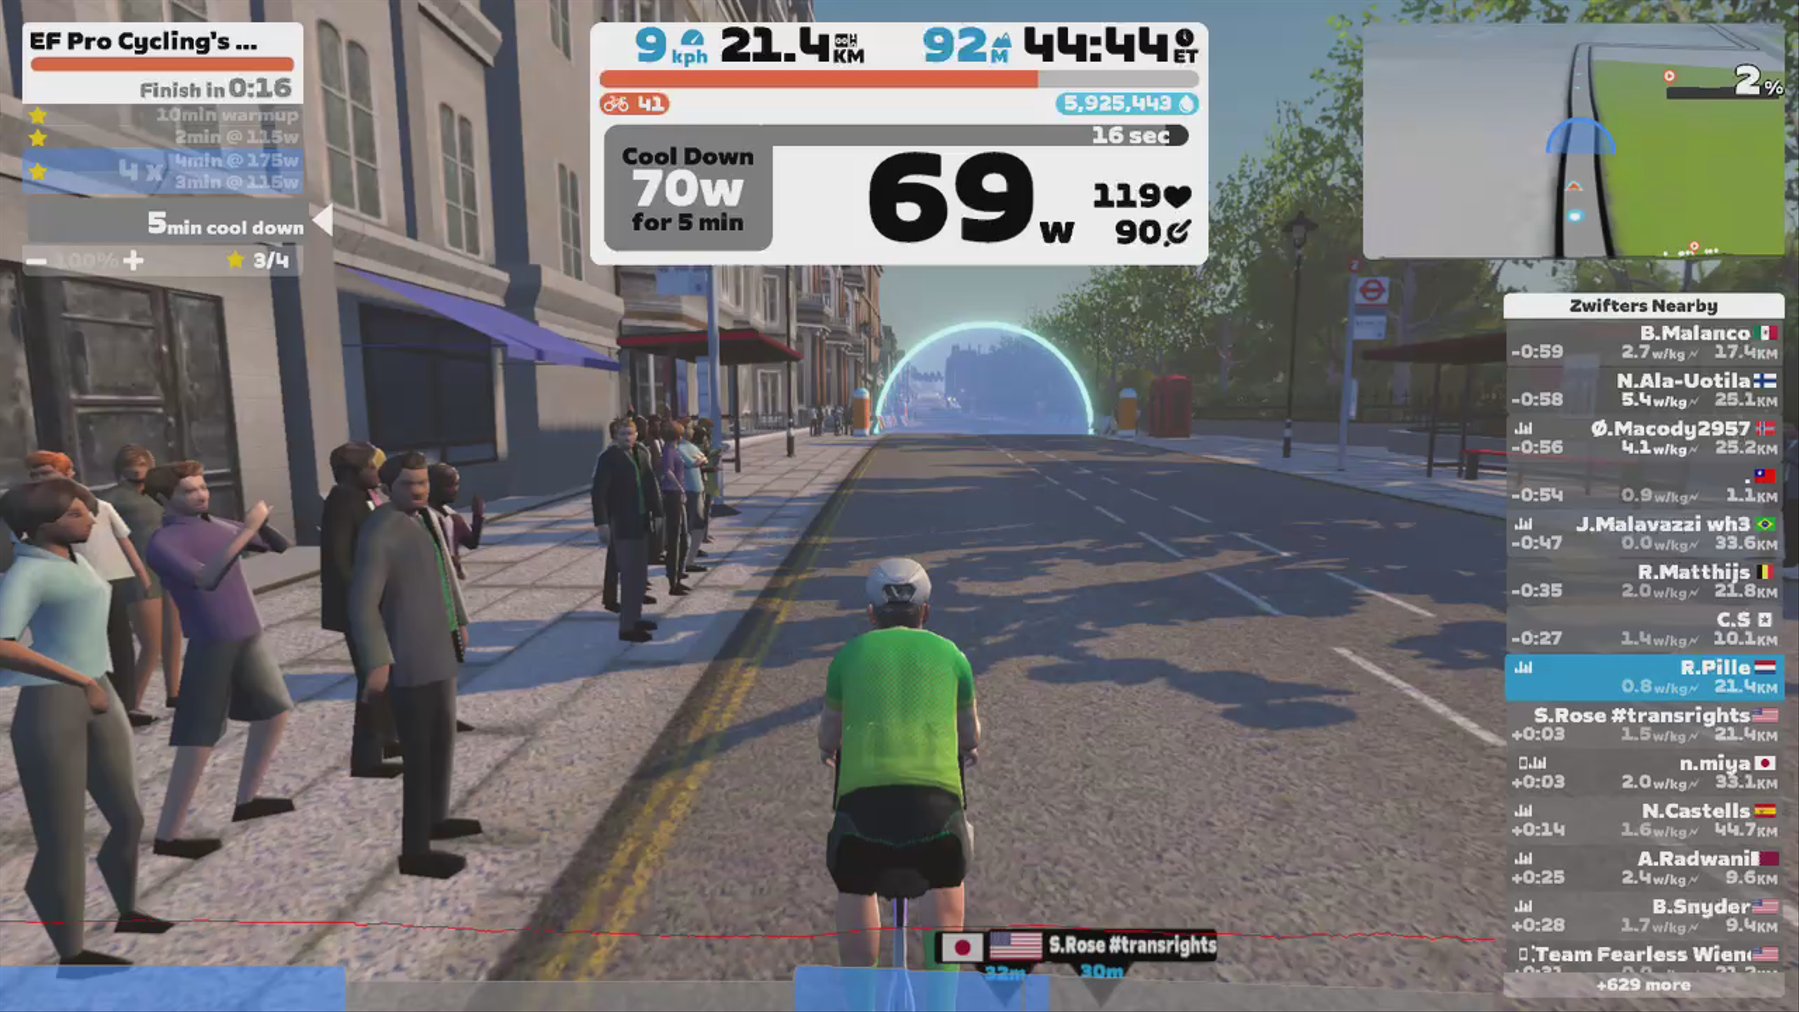 Zwift - EF Pro Cycling's Red Day Workout in London